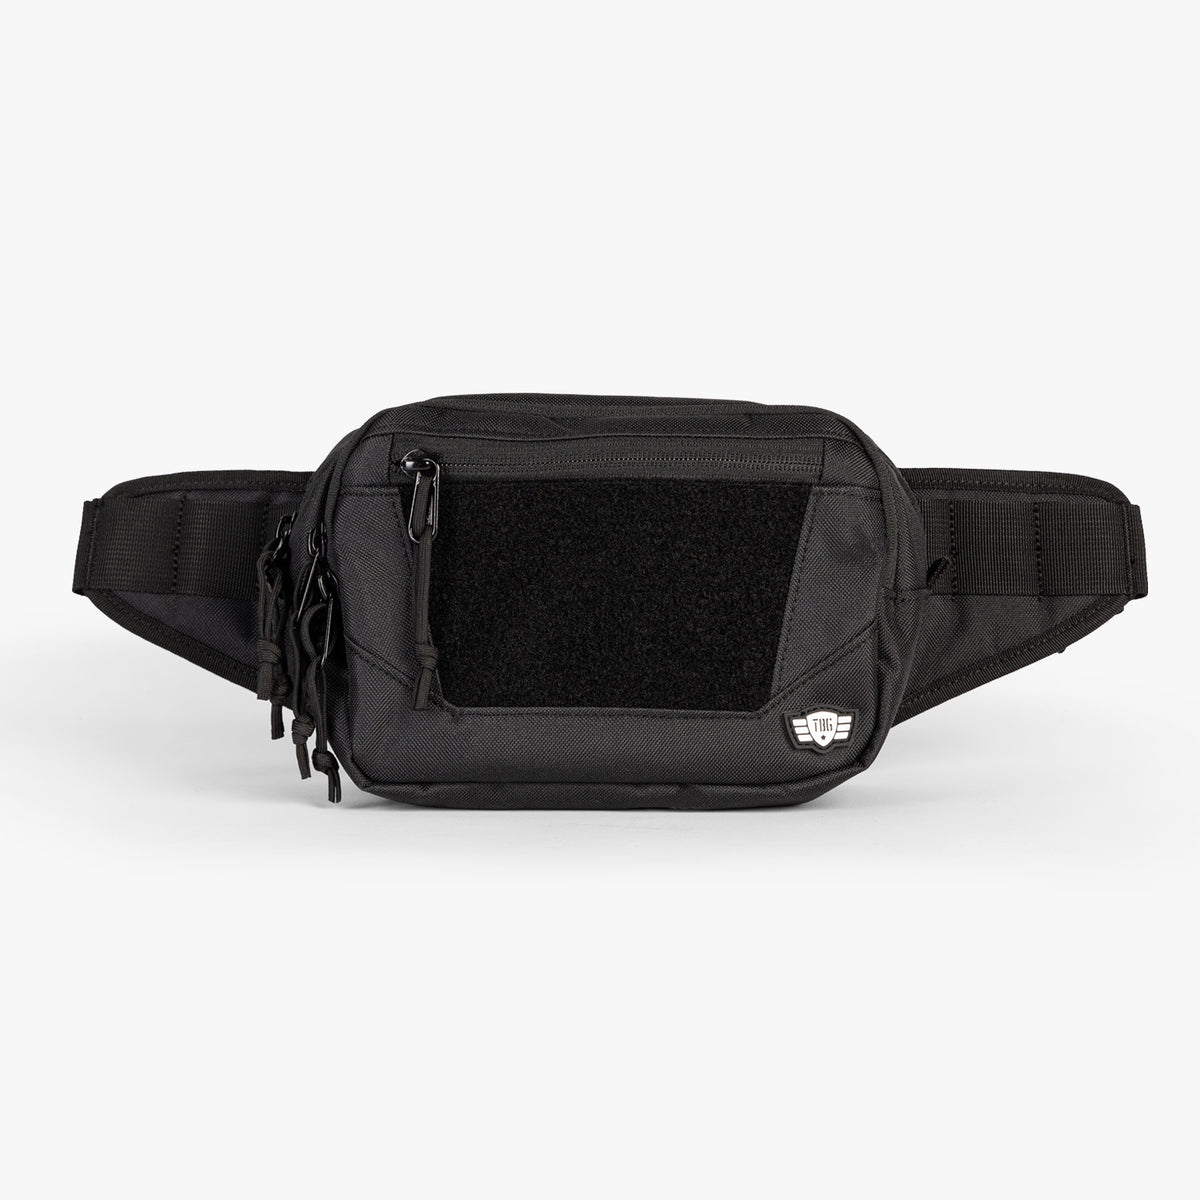 Tactical Baby Gear Fanny Pack